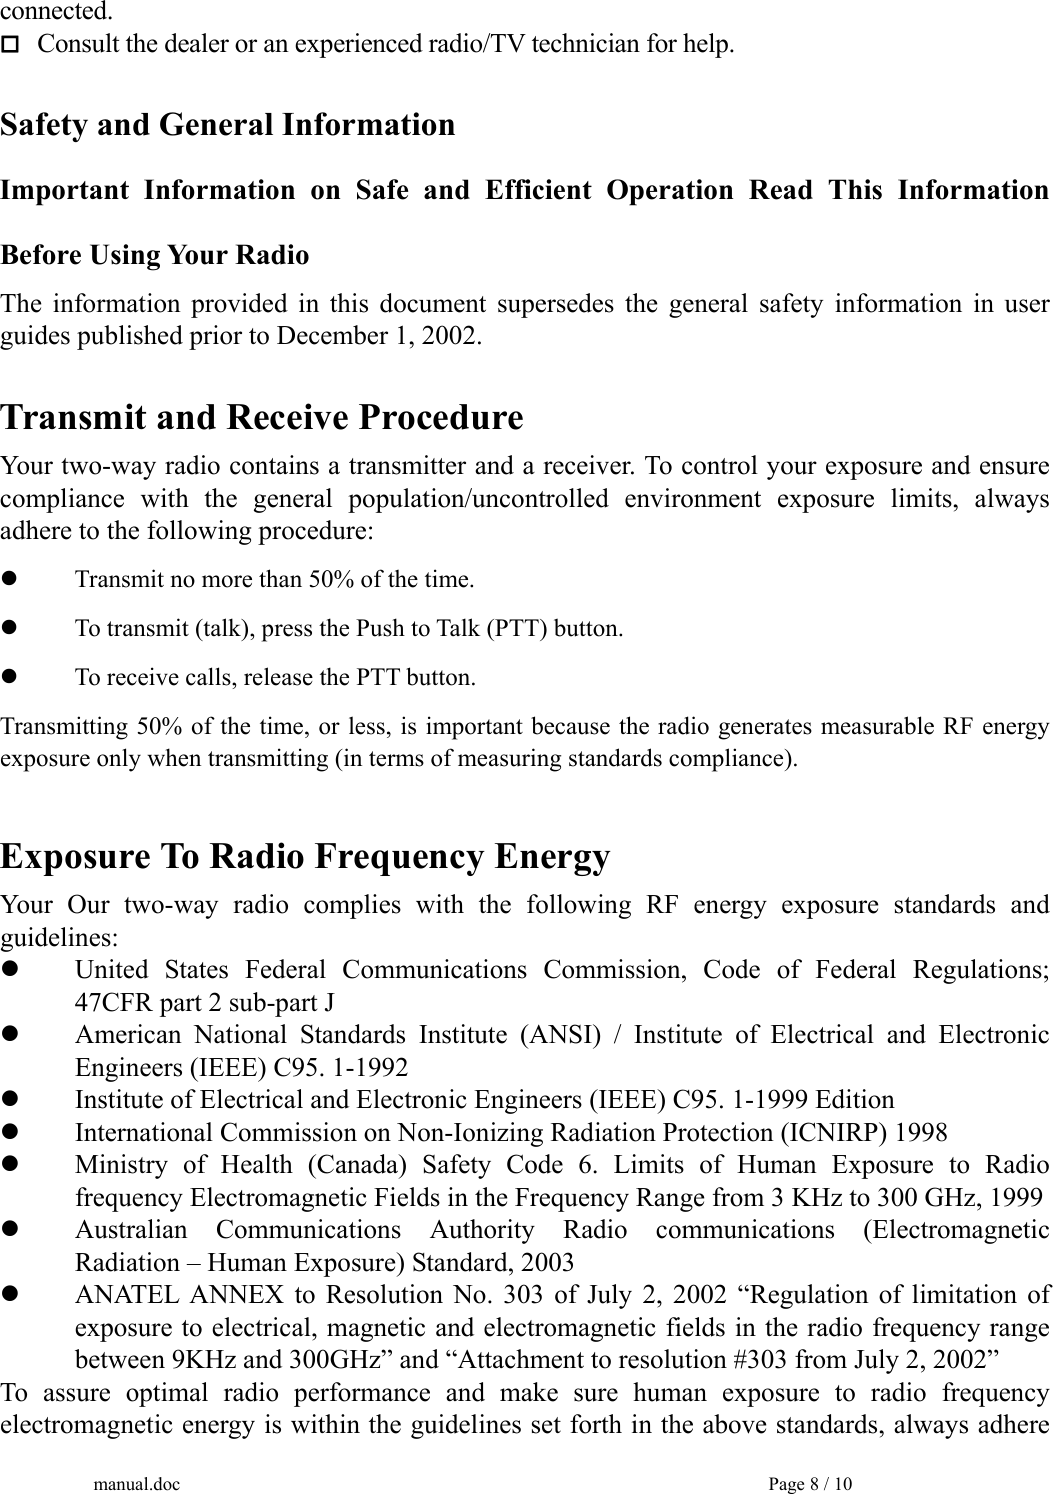 connected.  Consult the dealer or an experienced radio/TV technician for help.  Safety and General Information Important Information on Safe and Efficient Operation Read This Information Before Using Your Radio The information provided in this document supersedes the general safety information in user guides published prior to December 1, 2002.  Transmit and Receive Procedure Your two-way radio contains a transmitter and a receiver. To control your exposure and ensure compliance with the general population/uncontrolled environment exposure limits, always adhere to the following procedure:   Transmit no more than 50% of the time.   To transmit (talk), press the Push to Talk (PTT) button.   To receive calls, release the PTT button. Transmitting 50% of the time, or less, is important because the radio generates measurable RF energy exposure only when transmitting (in terms of measuring standards compliance).  Exposure To Radio Frequency Energy Your Our two-way radio complies with the following RF energy exposure standards and guidelines:   United States Federal Communications Commission, Code of Federal Regulations;   47CFR part 2 sub-part J   American National Standards Institute (ANSI) / Institute of Electrical and Electronic   Engineers (IEEE) C95. 1-1992   Institute of Electrical and Electronic Engineers (IEEE) C95. 1-1999 Edition   International Commission on Non-Ionizing Radiation Protection (ICNIRP) 1998   Ministry of Health (Canada) Safety Code 6. Limits of Human Exposure to Radio   frequency Electromagnetic Fields in the Frequency Range from 3 KHz to 300 GHz, 1999   Australian Communications Authority Radio communications (Electromagnetic   Radiation – Human Exposure) Standard, 2003   ANATEL ANNEX to Resolution No. 303 of July 2, 2002 “Regulation of limitation of   exposure to electrical, magnetic and electromagnetic fields in the radio frequency range   between 9KHz and 300GHz” and “Attachment to resolution #303 from July 2, 2002” To assure optimal radio performance and make sure human exposure to radio frequency electromagnetic energy is within the guidelines set forth in the above standards, always adhere manual.doc    Page 8 / 10 